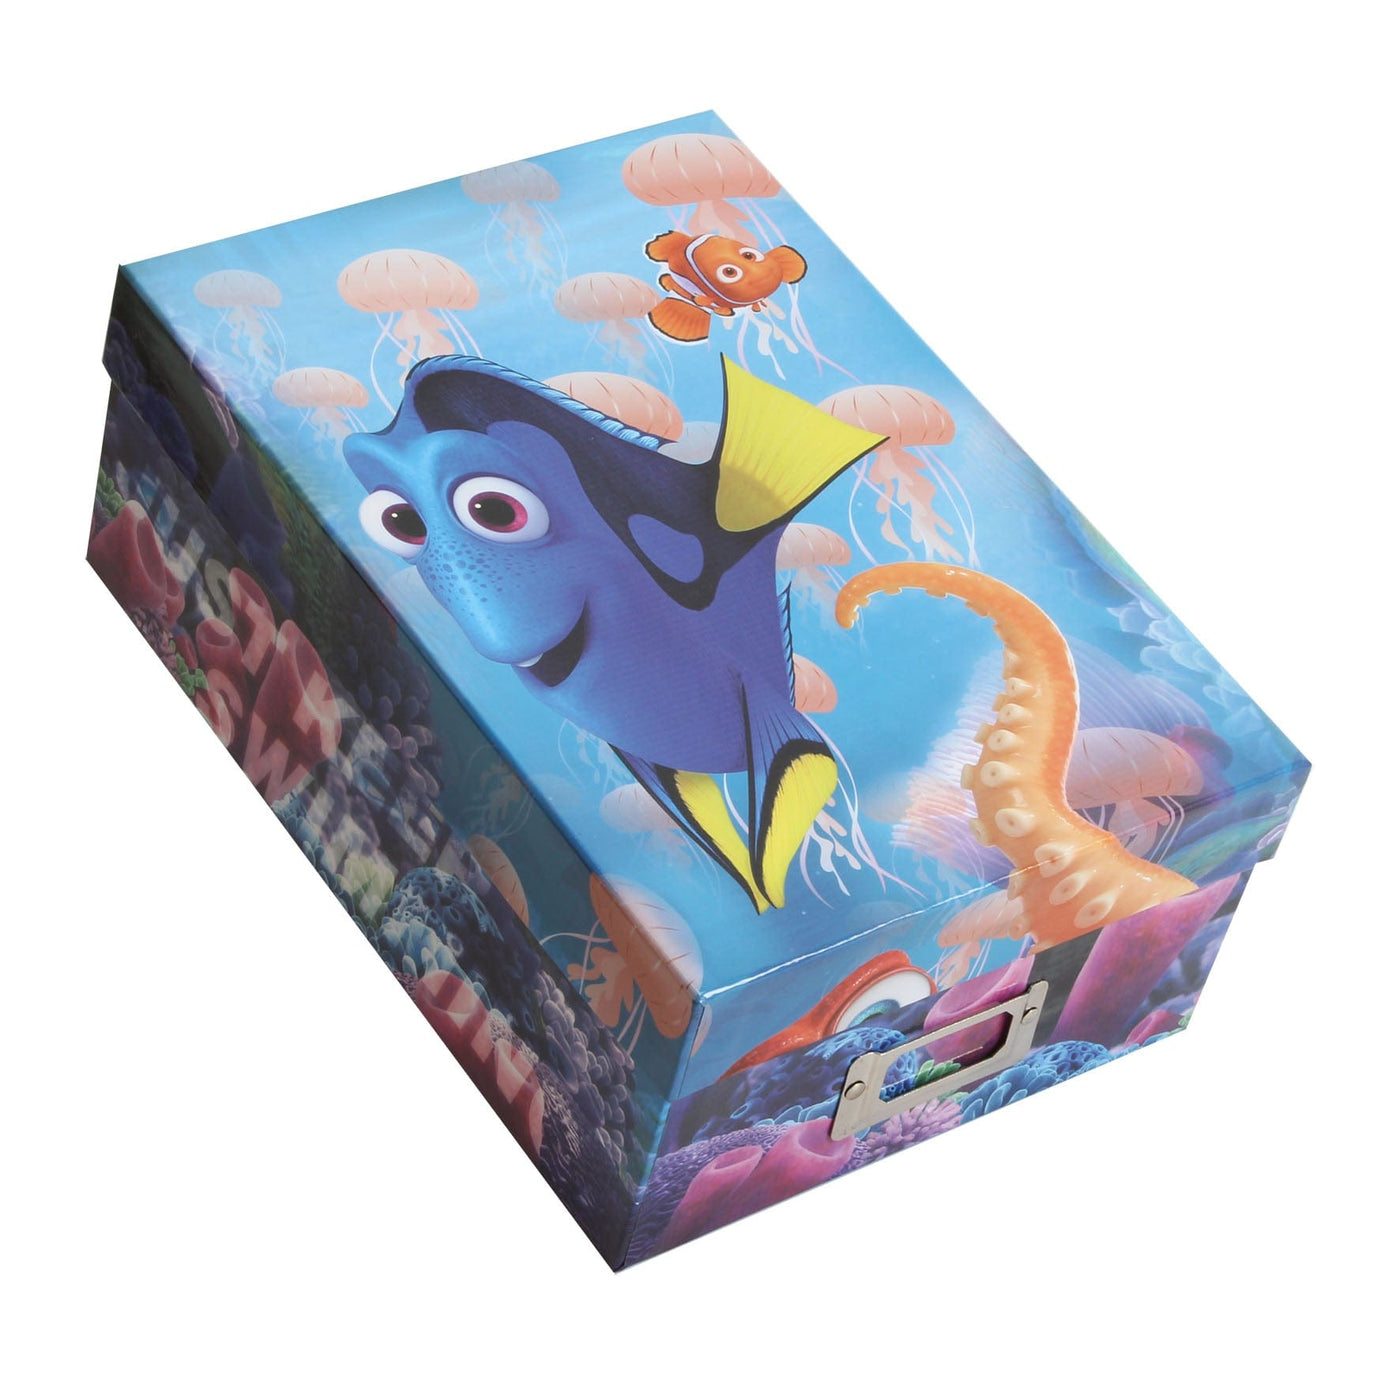 Widdop Gifts Christmas Decorations Dory Finding Nemo Disney Character Photo Box